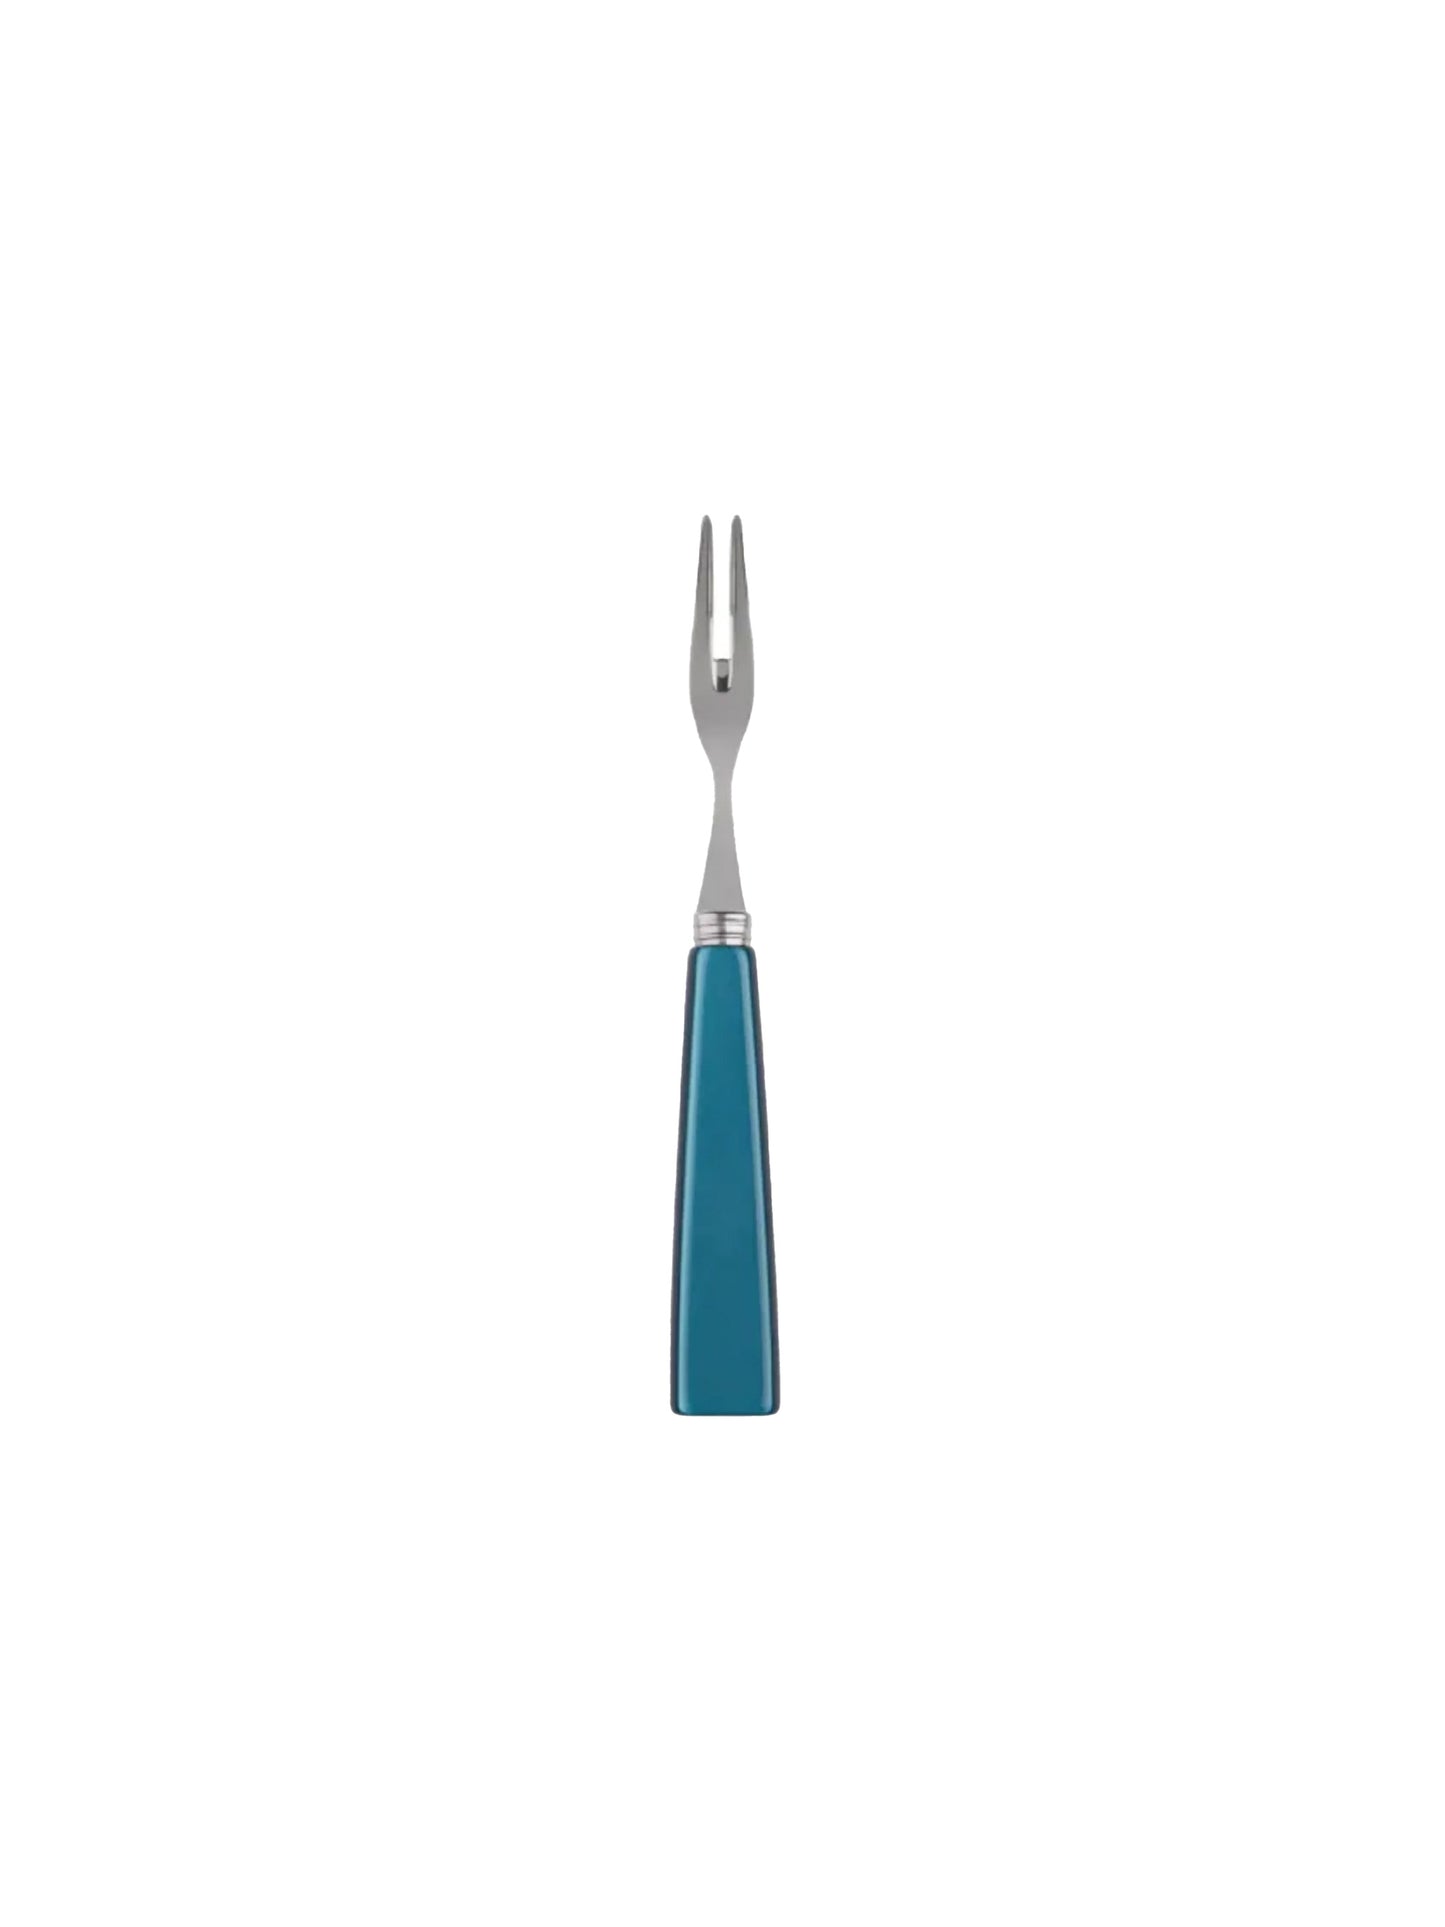 Sabre Paris Icone Turquoise Cocktail Forks Weston Table